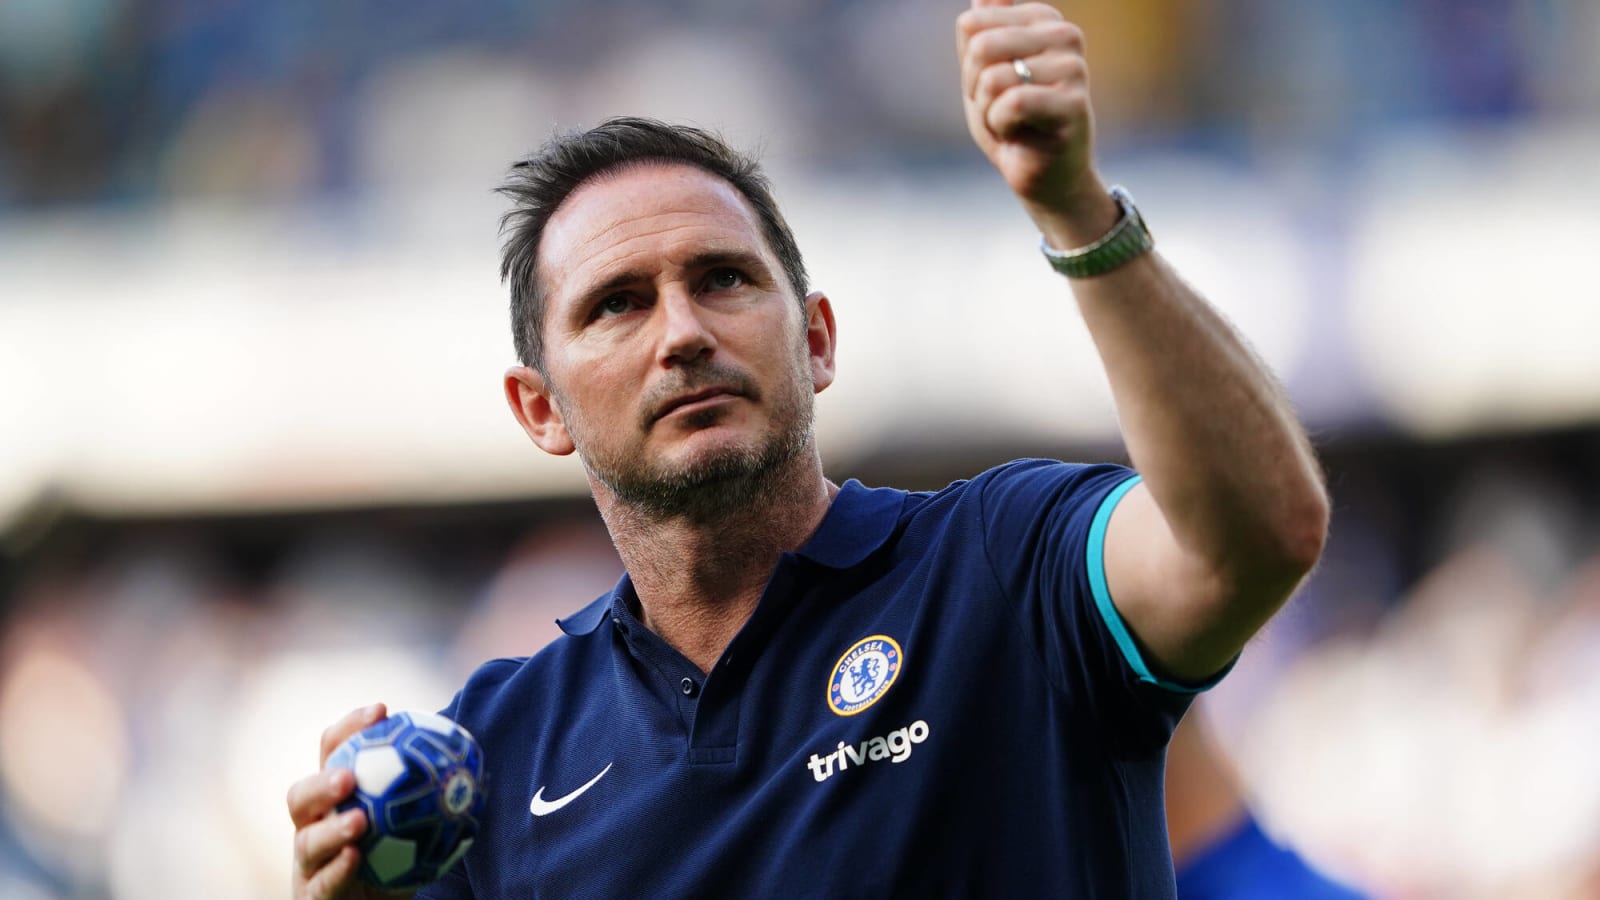 Big European club considering Frank Lampard to take over as new manager